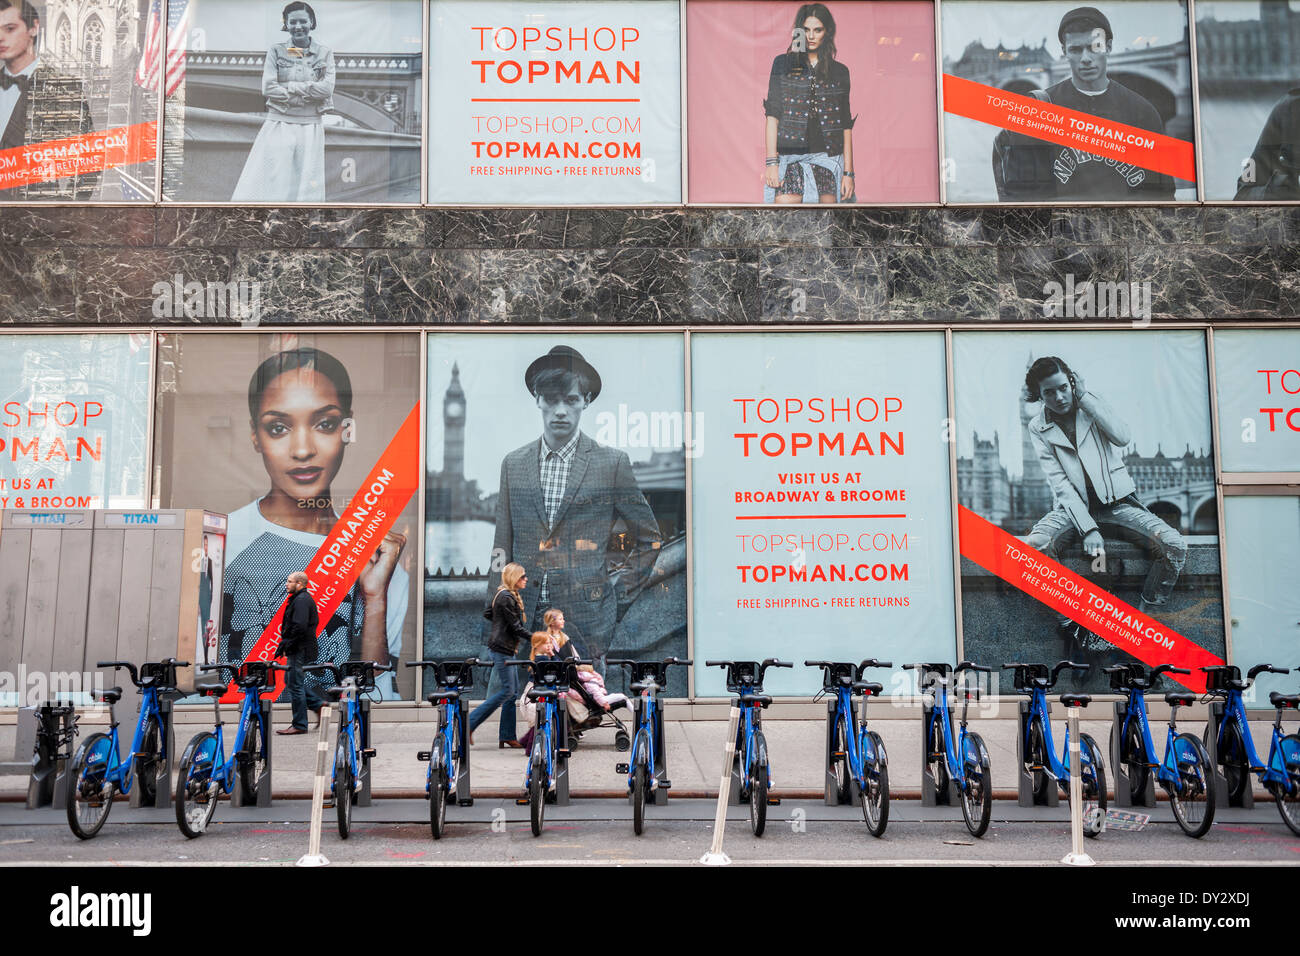 Topshop Entrance High Resolution Stock Photography and Images - Alamy